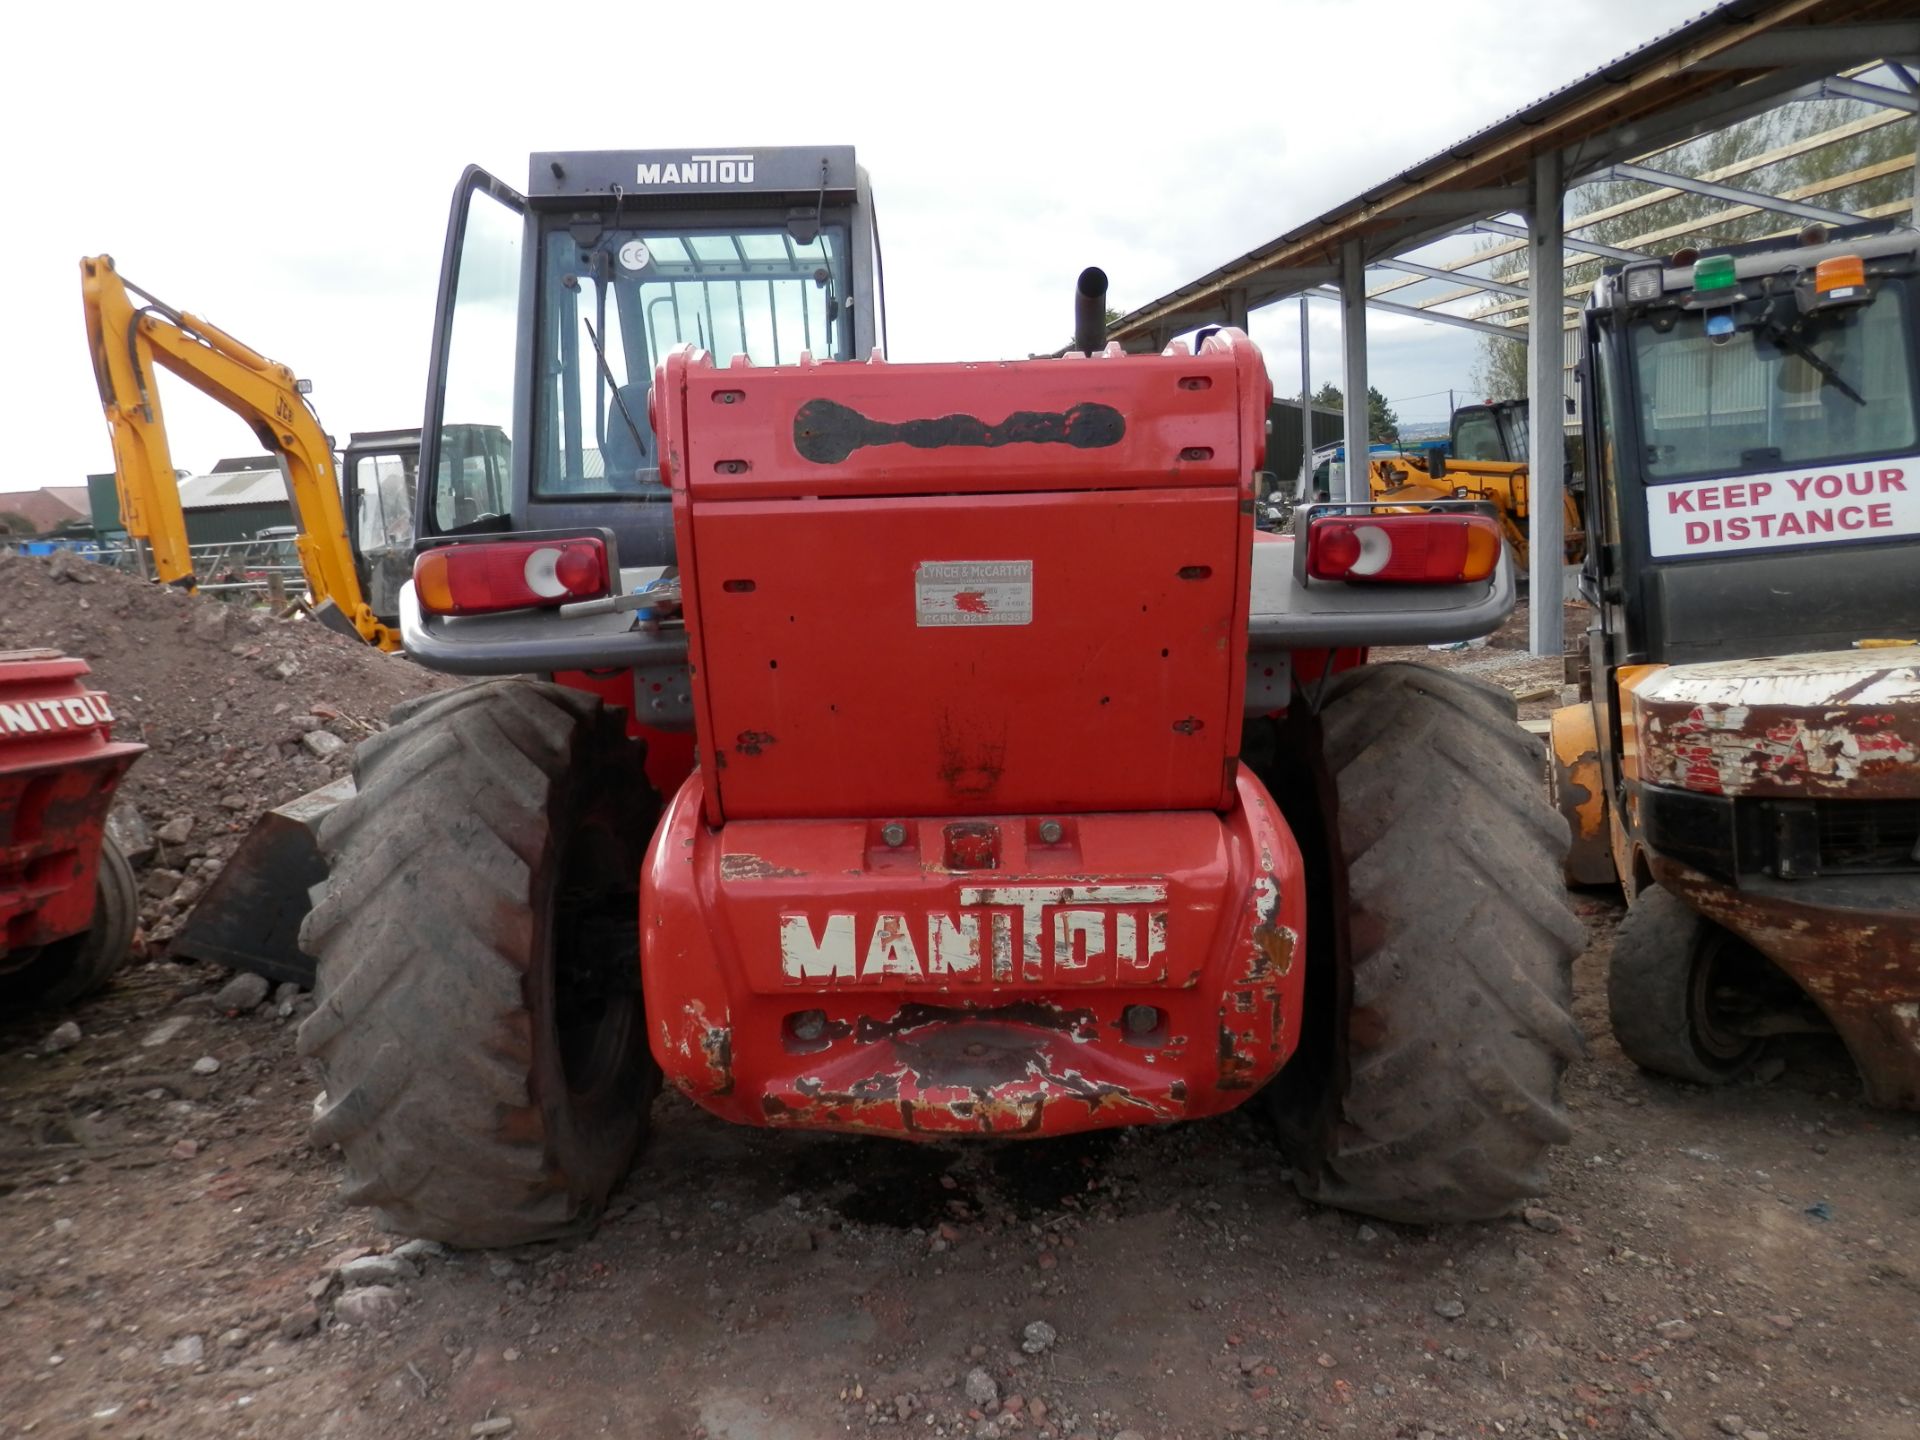 2003 MANITOU MANISCOPIC TELE LIFT WITH FORKS,3.5 TONNE LIFT CAPACITY. - Image 2 of 10